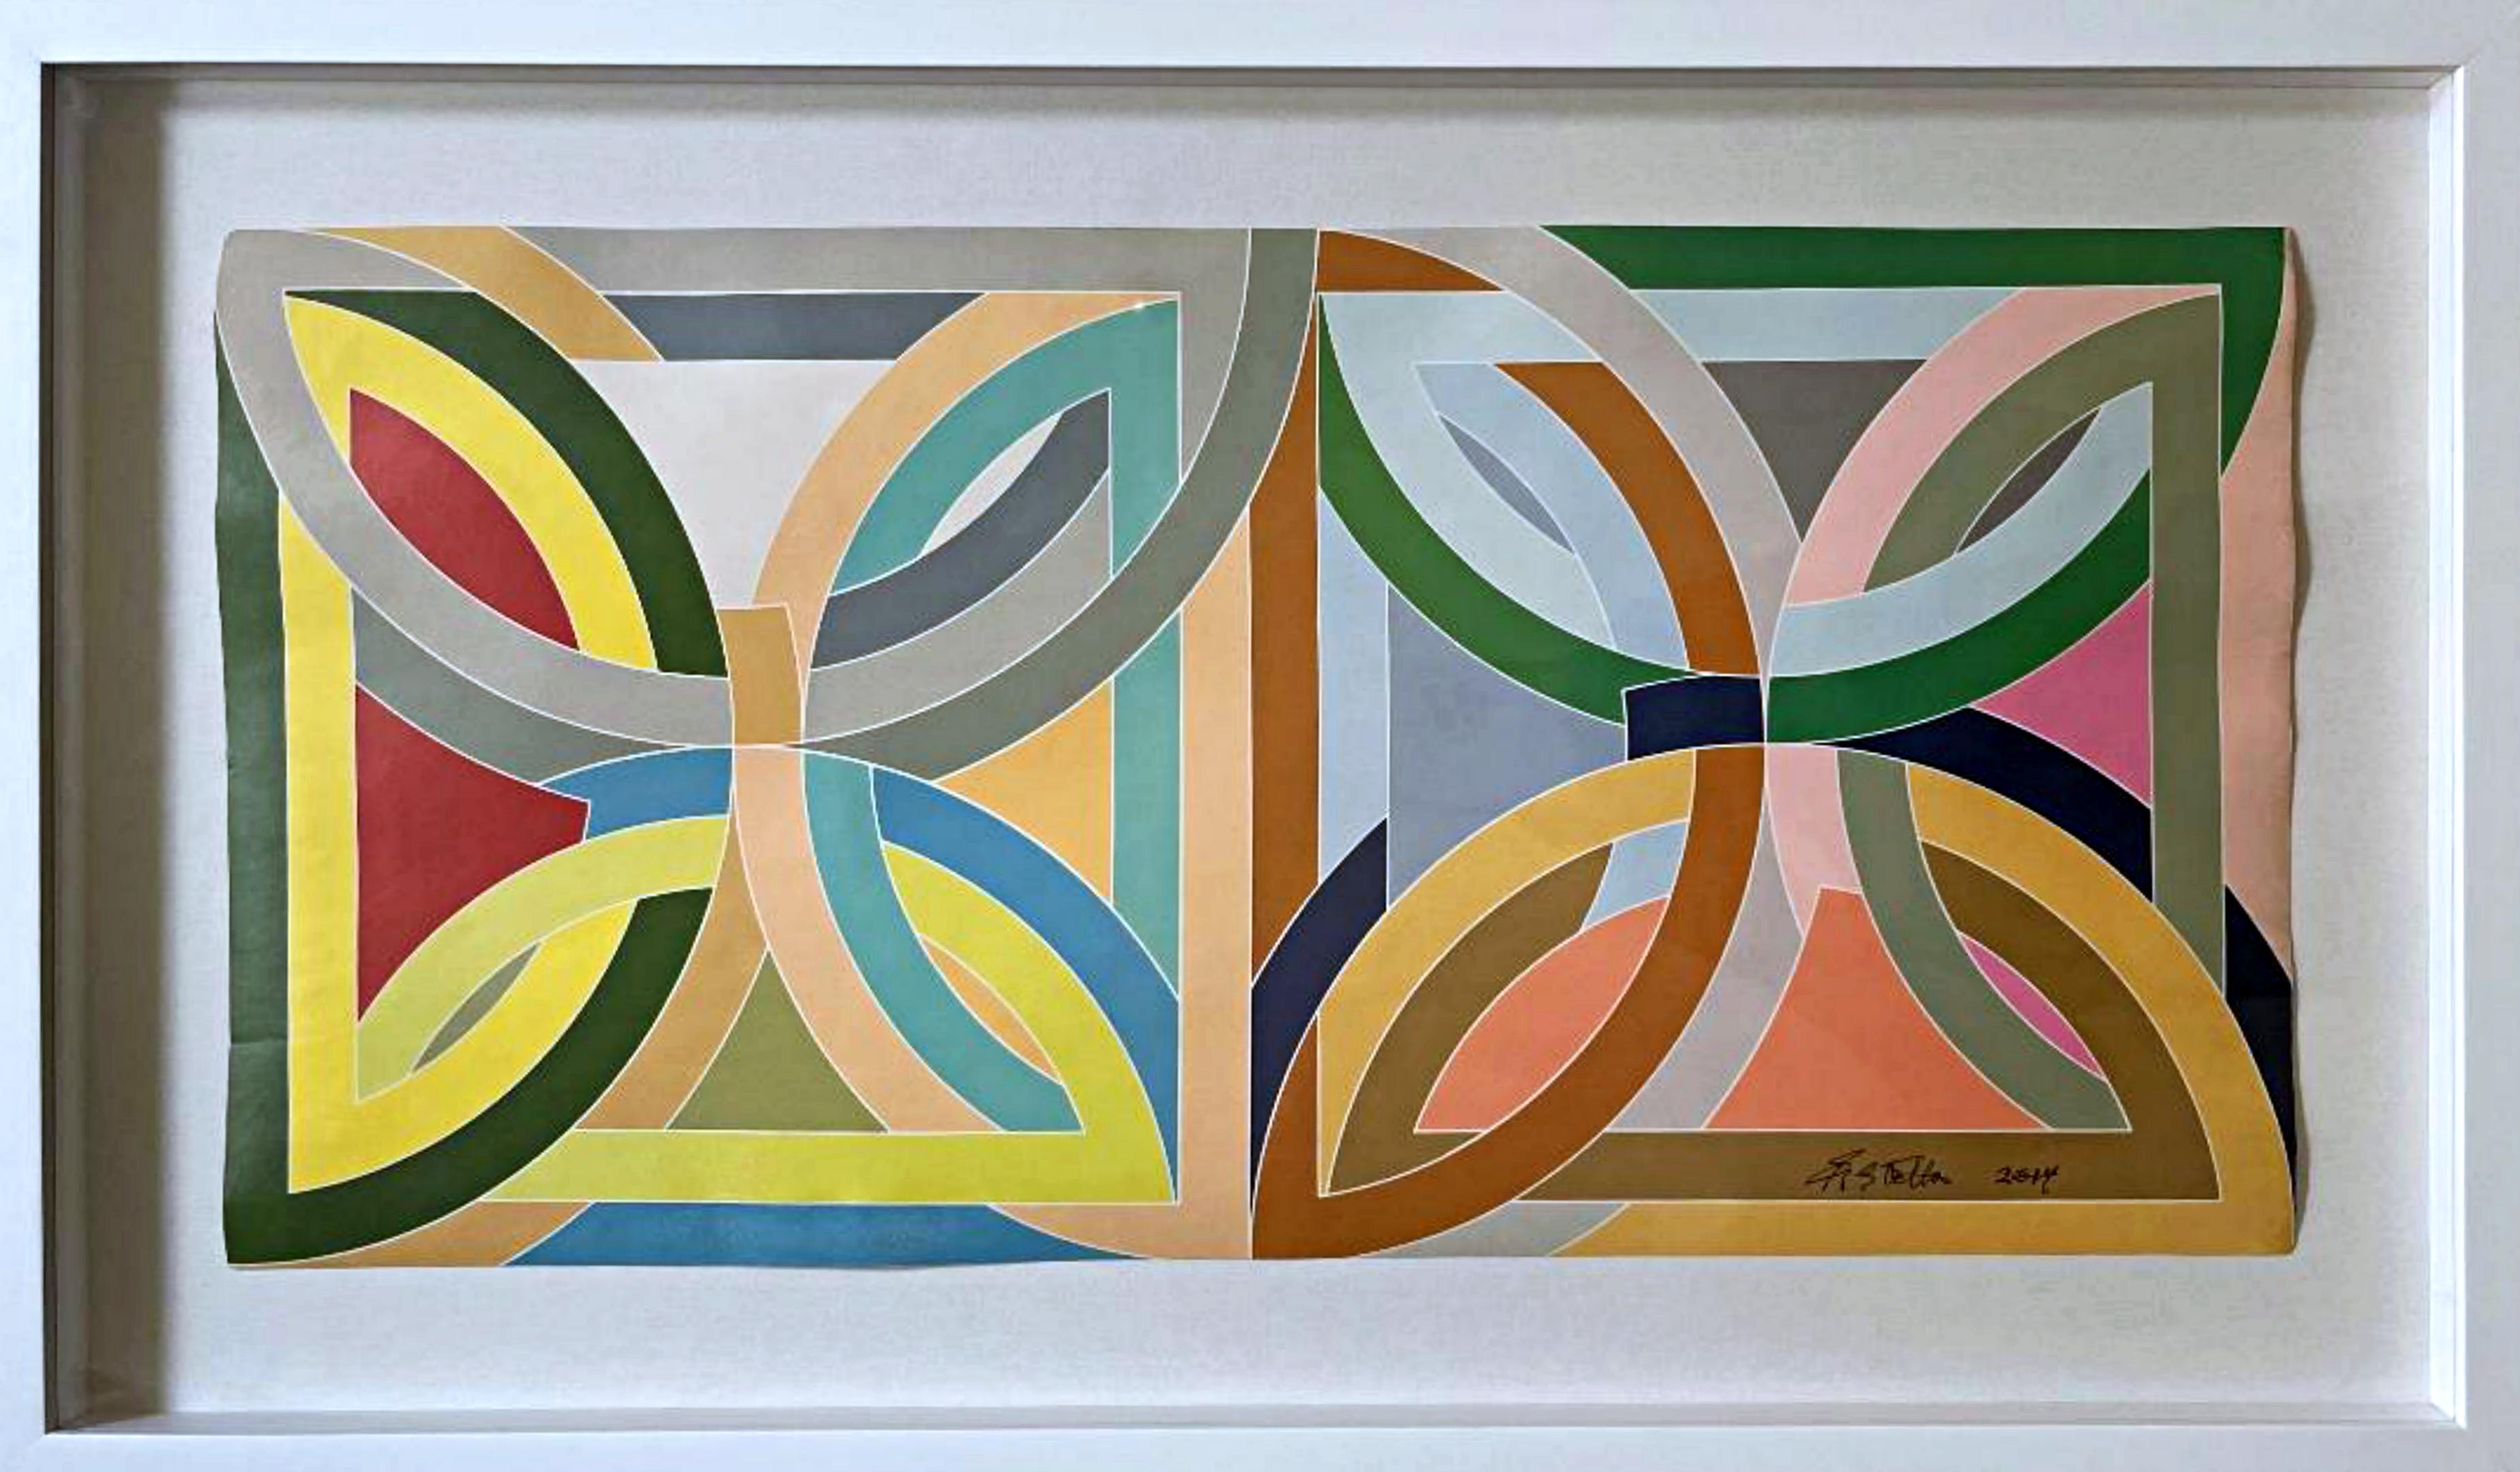 Frank Stella at Leo Castelli (Hand Signed and Dated), 1969
Offset Lithograph Invitation 
Boldly signed and dated 2014 in black marker; Stella signed this for the present owner so provenance is direct
Frame included: floated and framed under glass